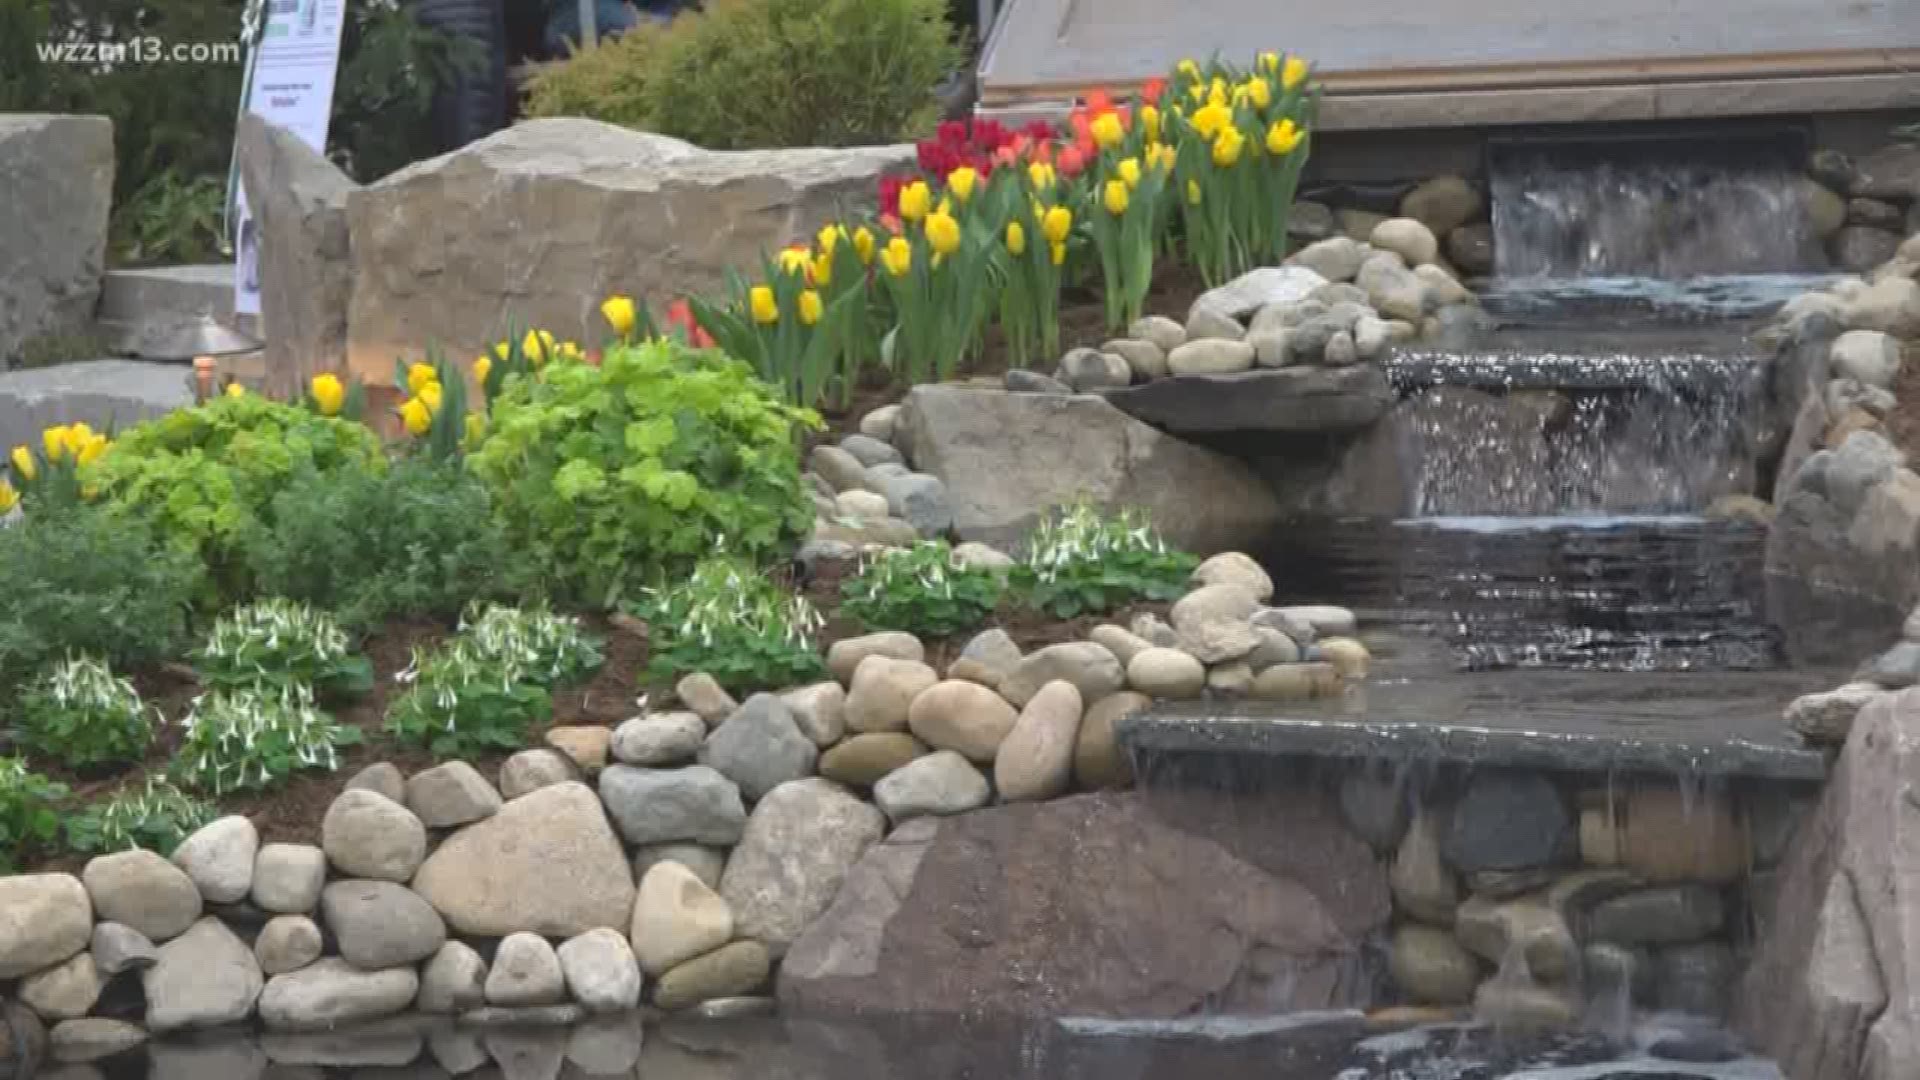 Greenthumb expert Rick Vuyst gives us a closer look at the West Michigan Home & Garden Show.